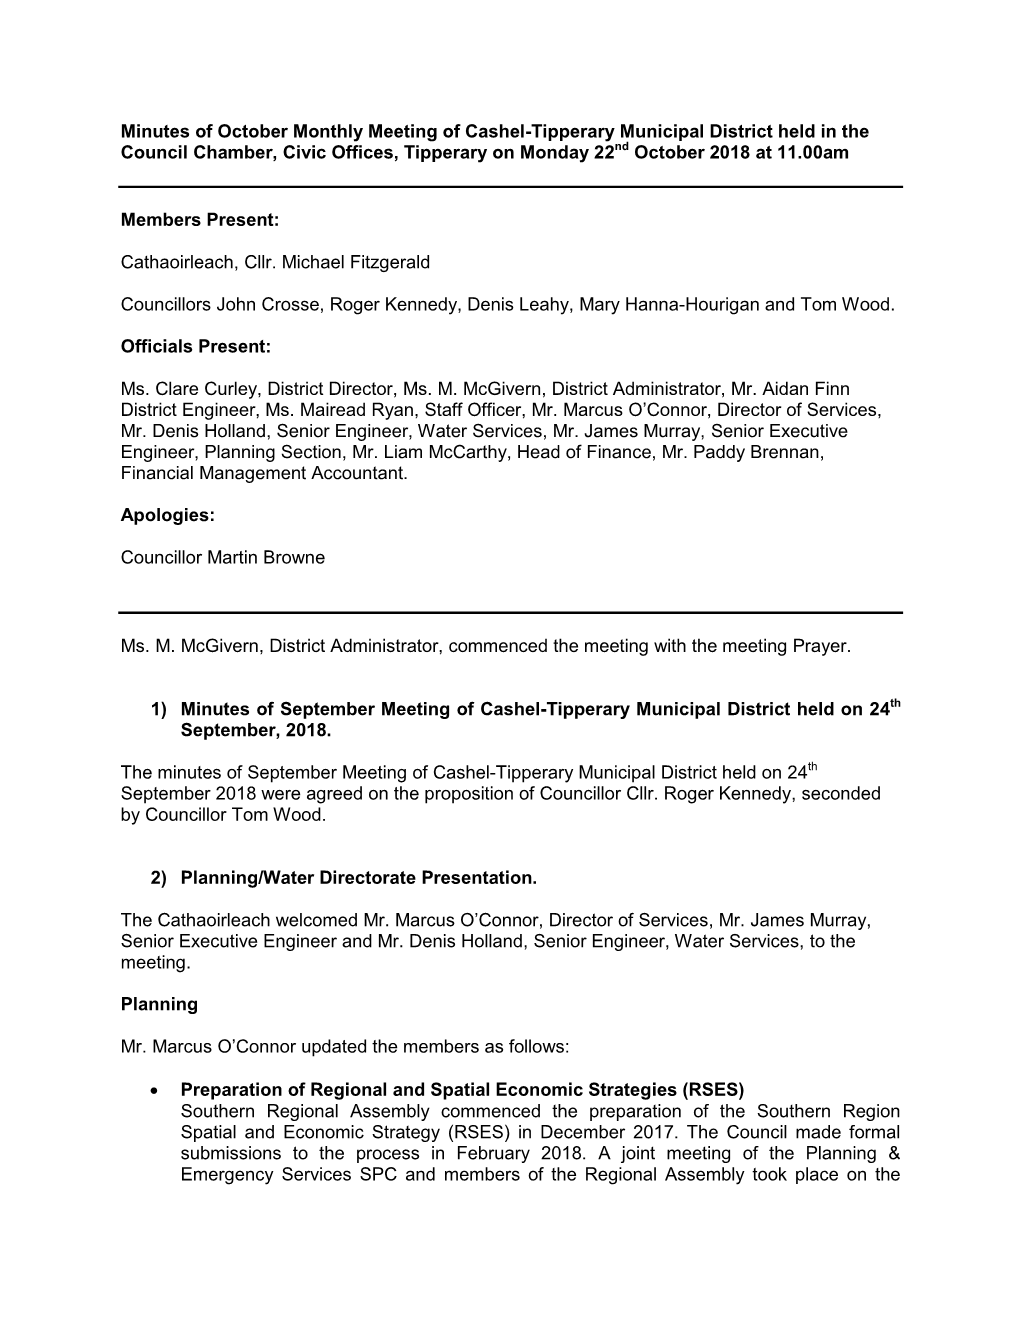 Minutes of October Monthly Meeting of Cashel-Tipperary Municipal District